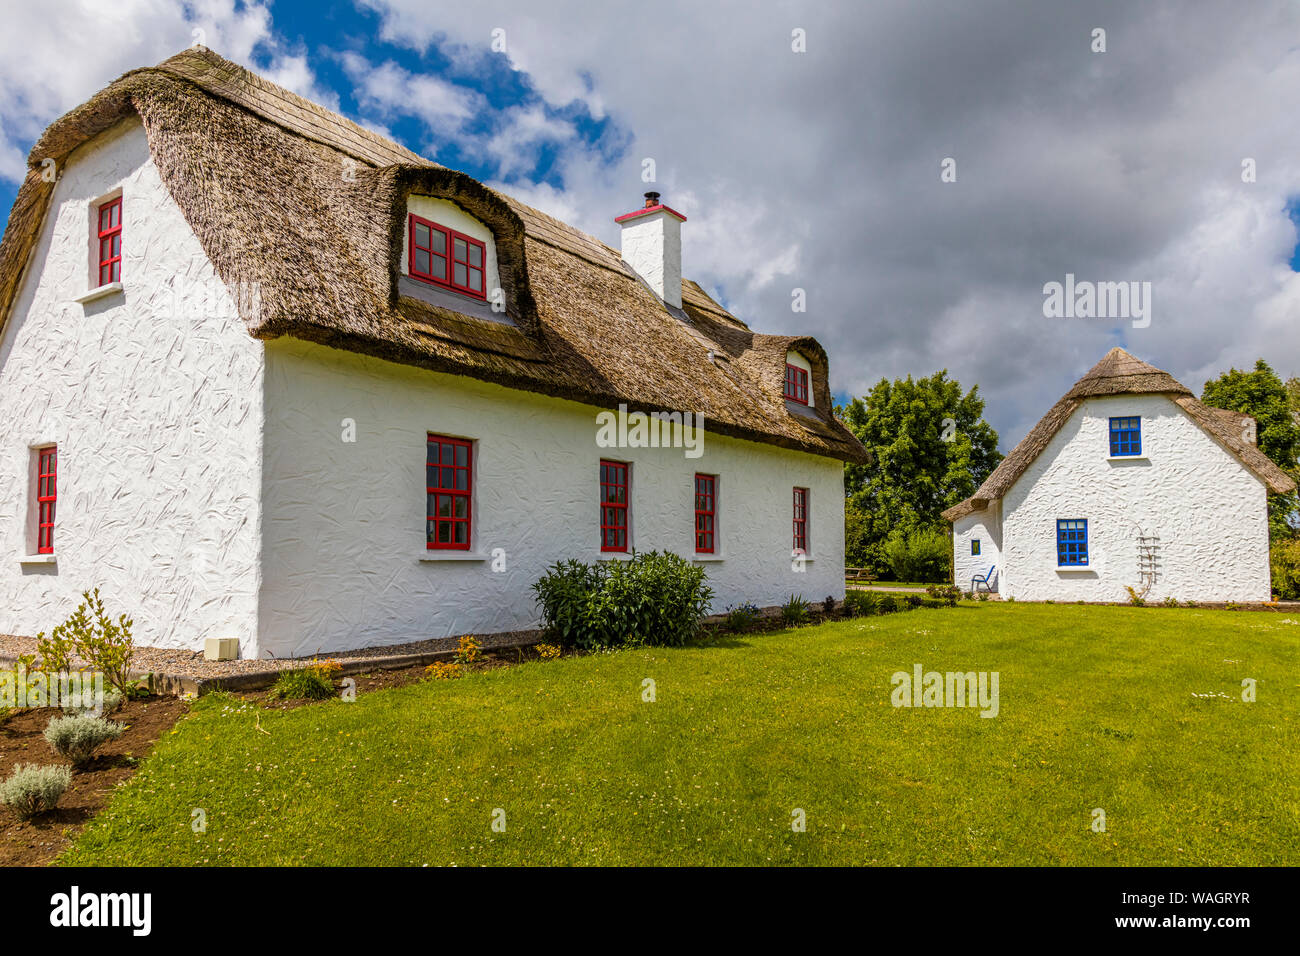 Thatched roof cottages in Kinvara in County Galway Ireland Stock Photo